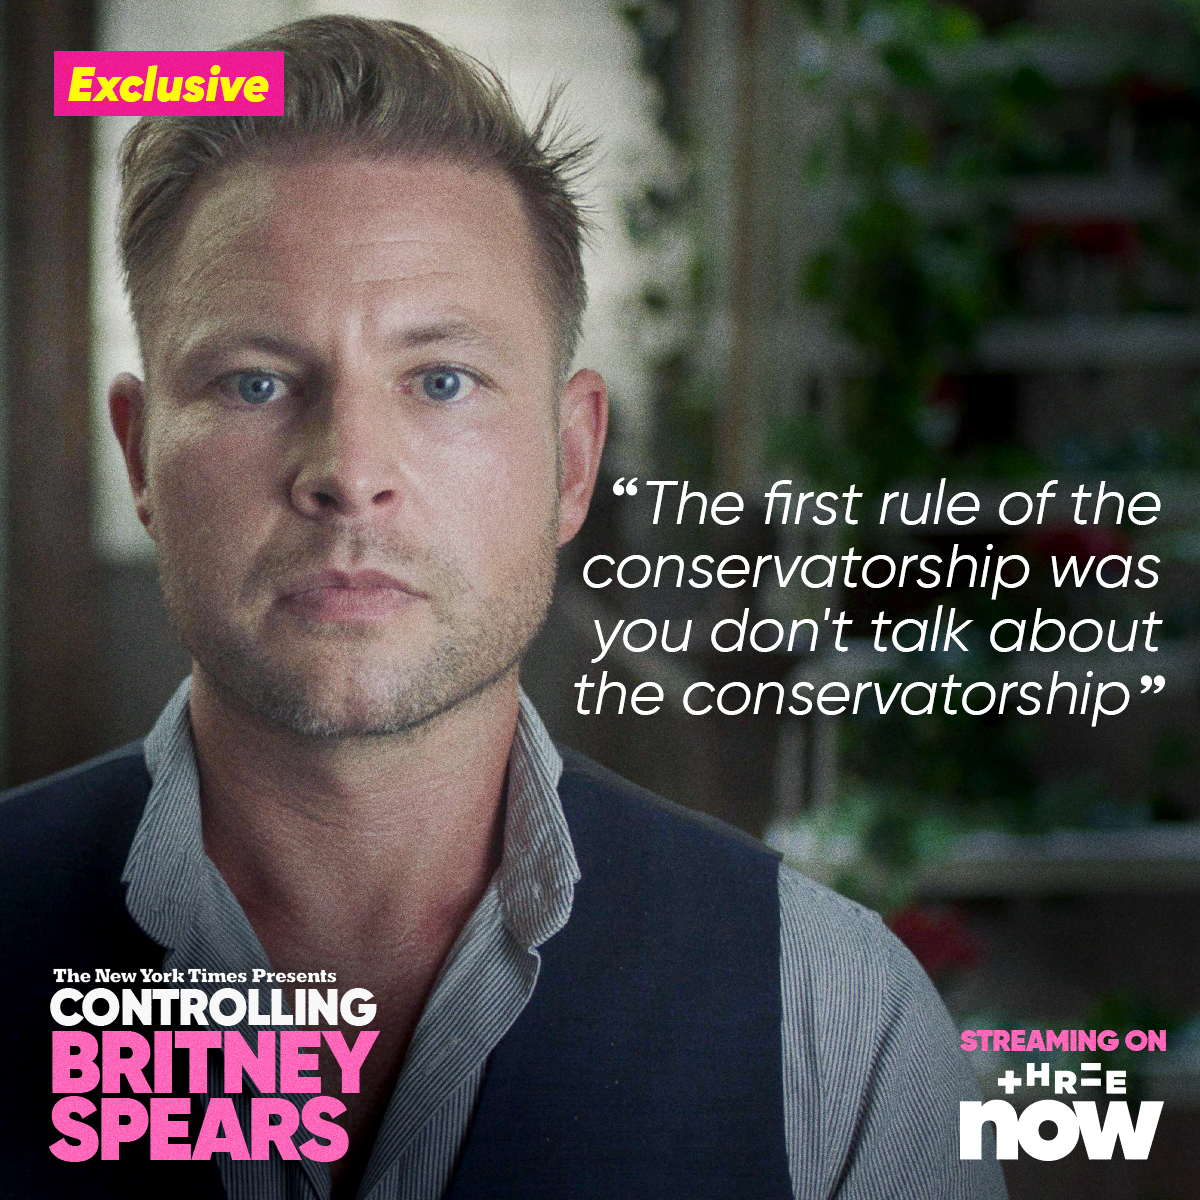 It's taken the world by storm with new revelations from inside Britney's conservatorship. Have you seen #ControllingBritneySpears yet? The New York Times Presents: Controlling Britney Spears. Streaming exclusively on ThreeNow.